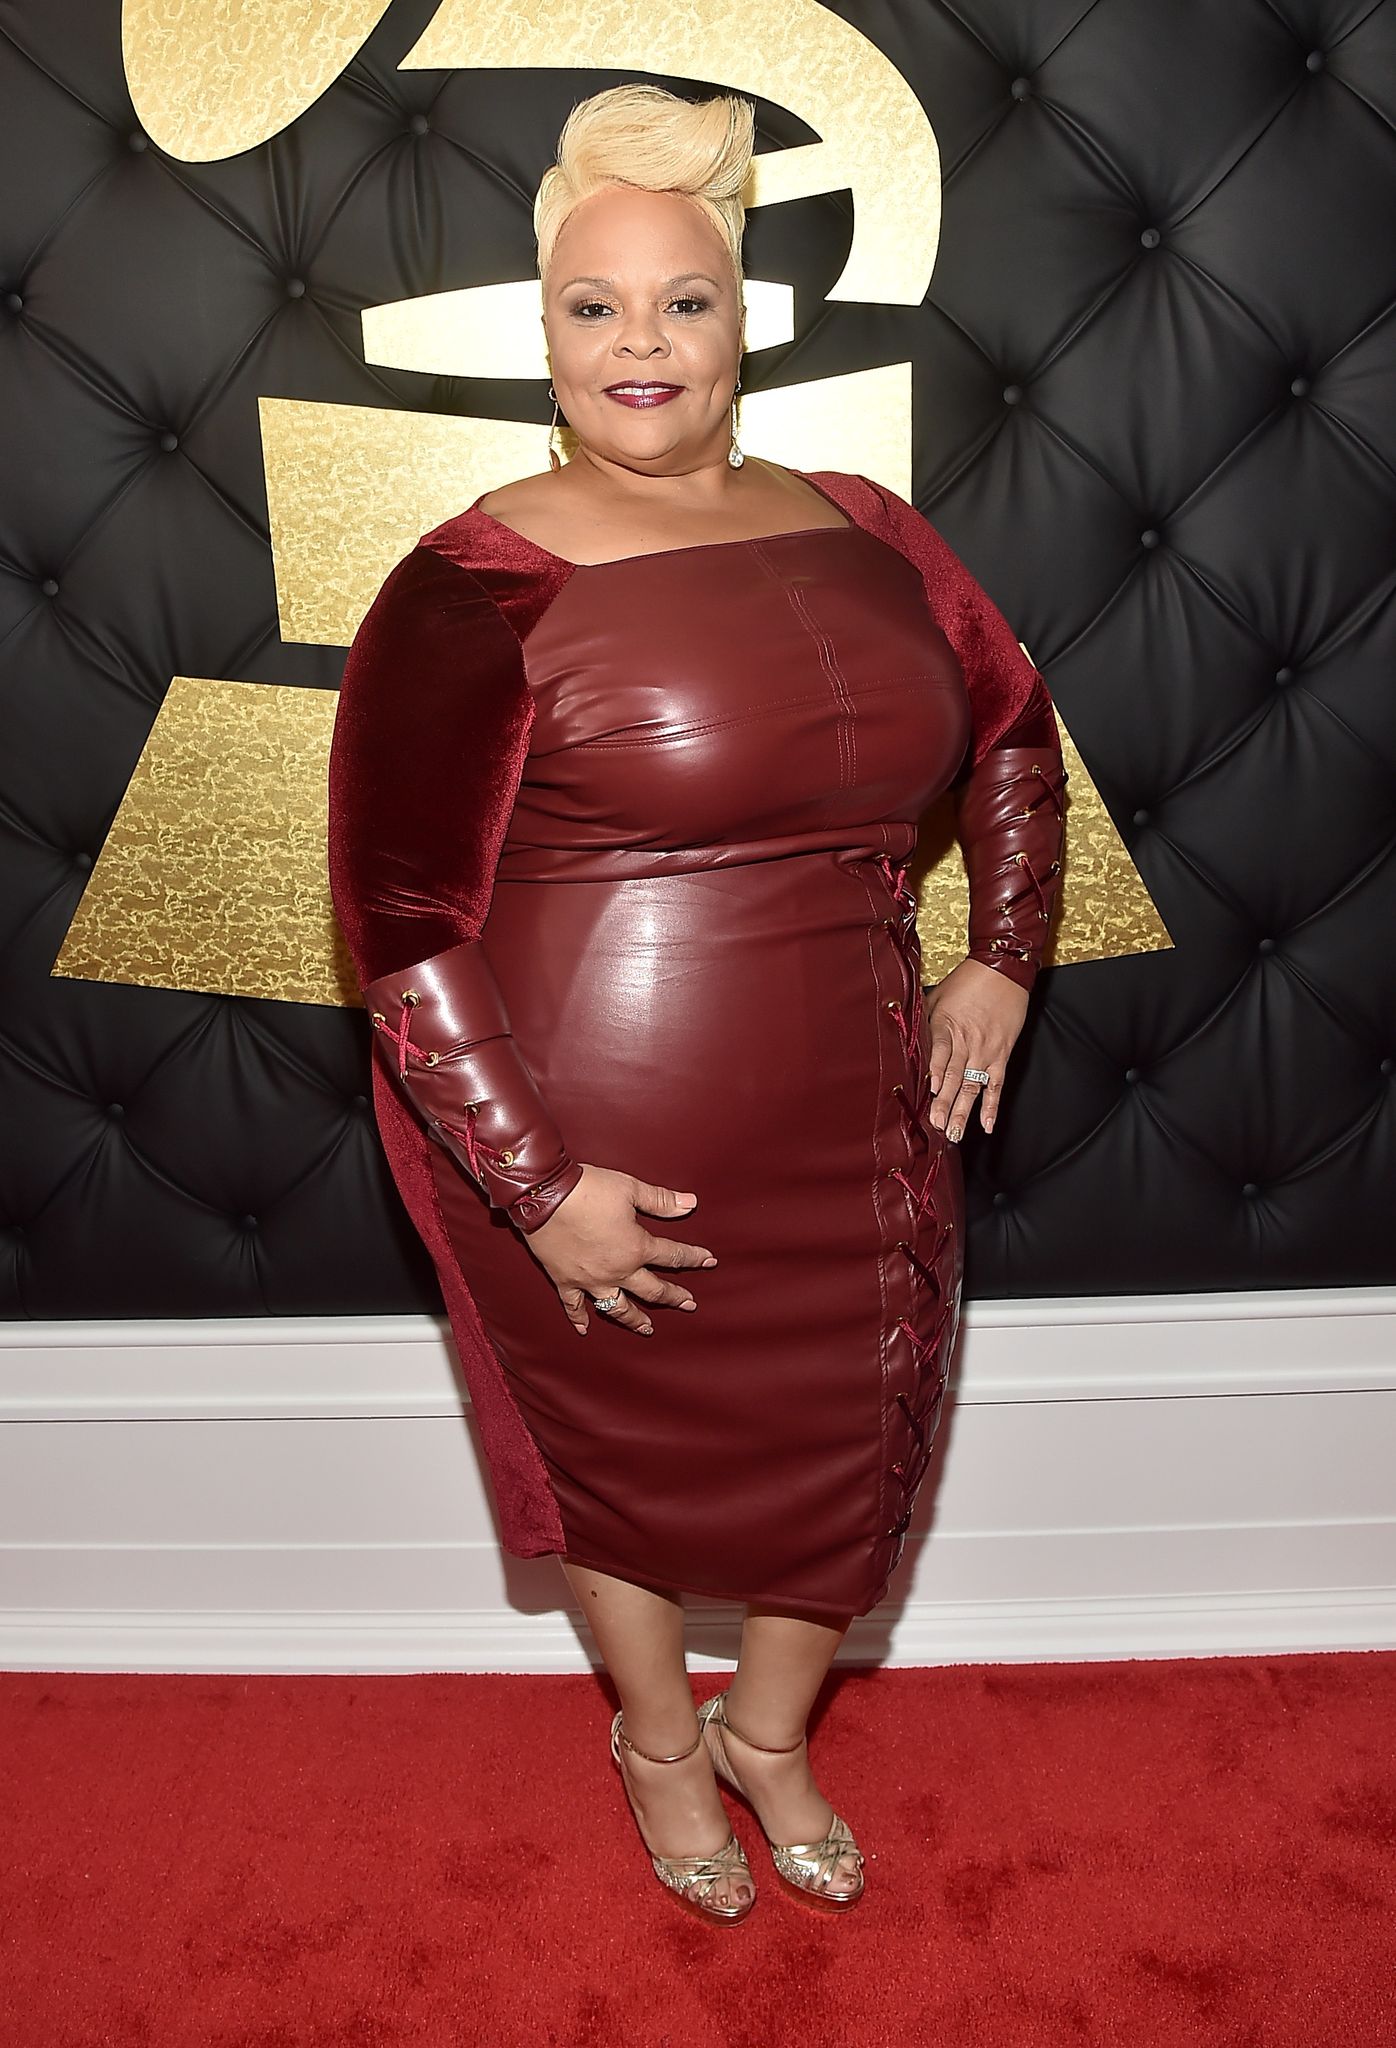 Tamela Mann at The 59th Grammy Awards at Staples Center on February 12, 2017. | Photo: Getty Images